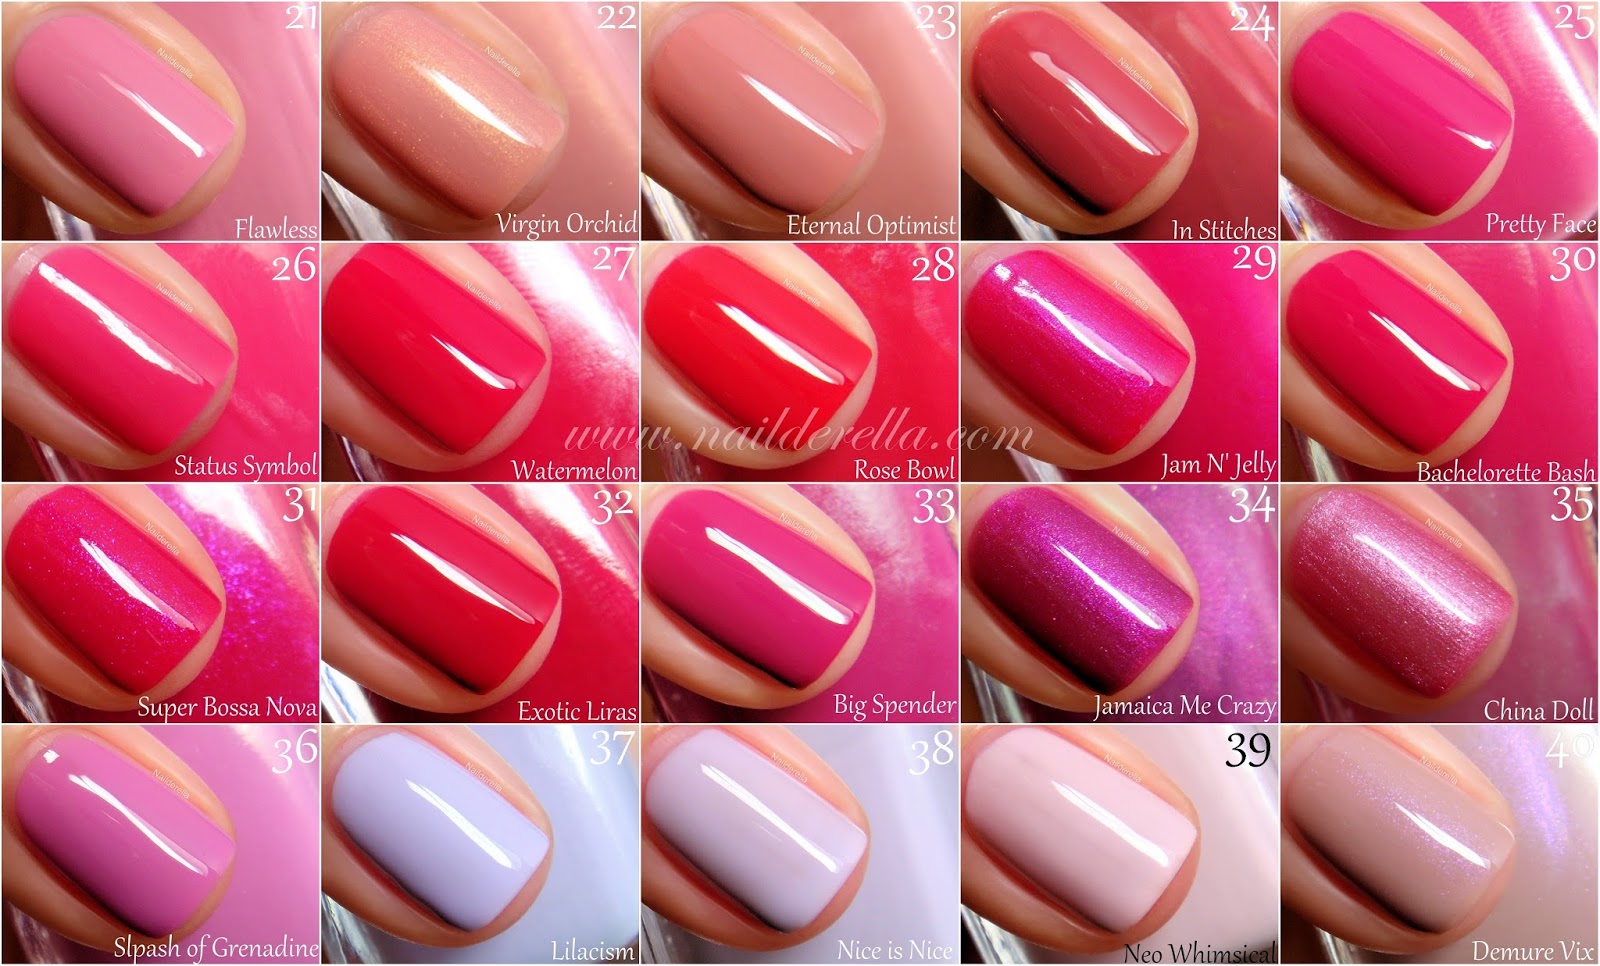 Essie Nail Polish Color Swatches - wide 5